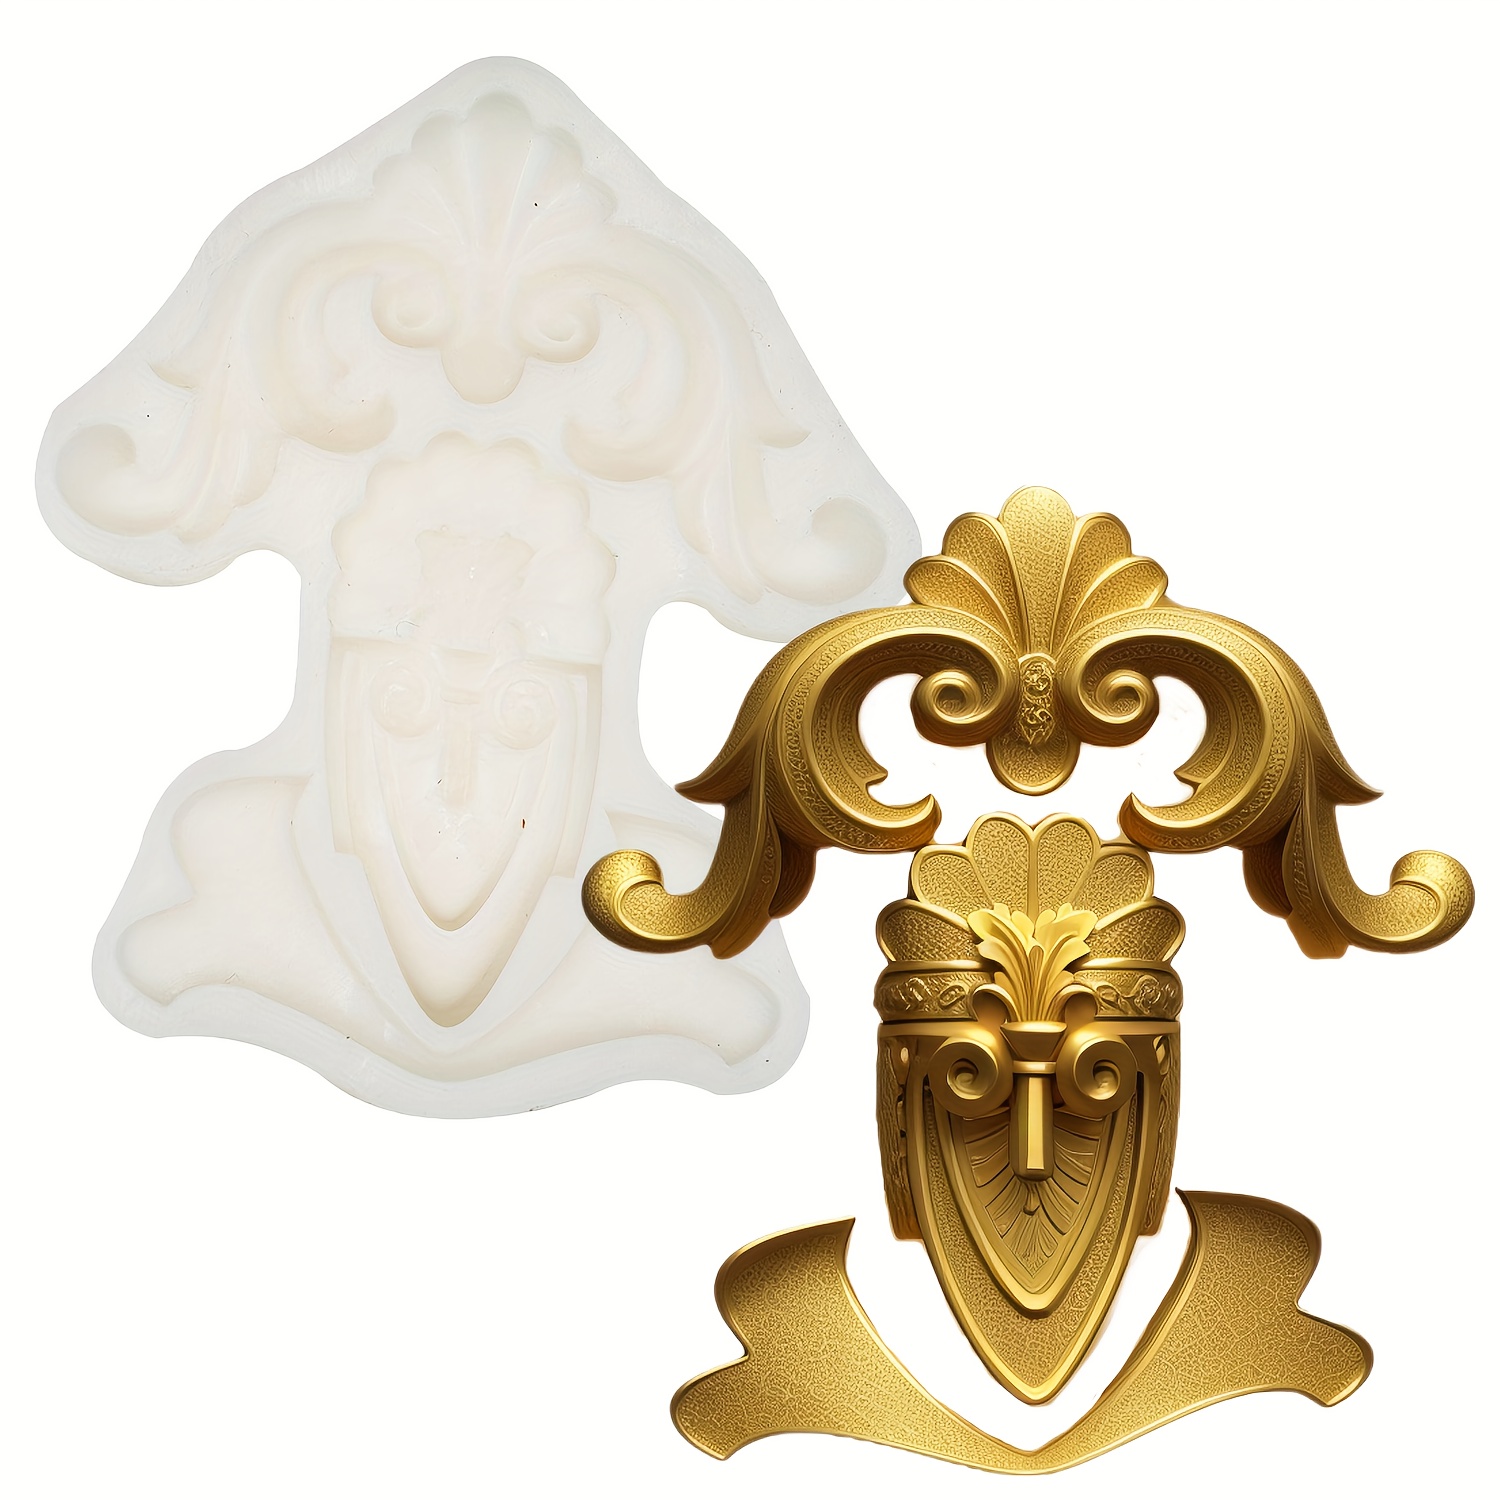 1pc baroque scroll relief fondant mold 3d silicone mold candy mold chocolate mold for diy cake decorating tool baking tools kitchen accessories